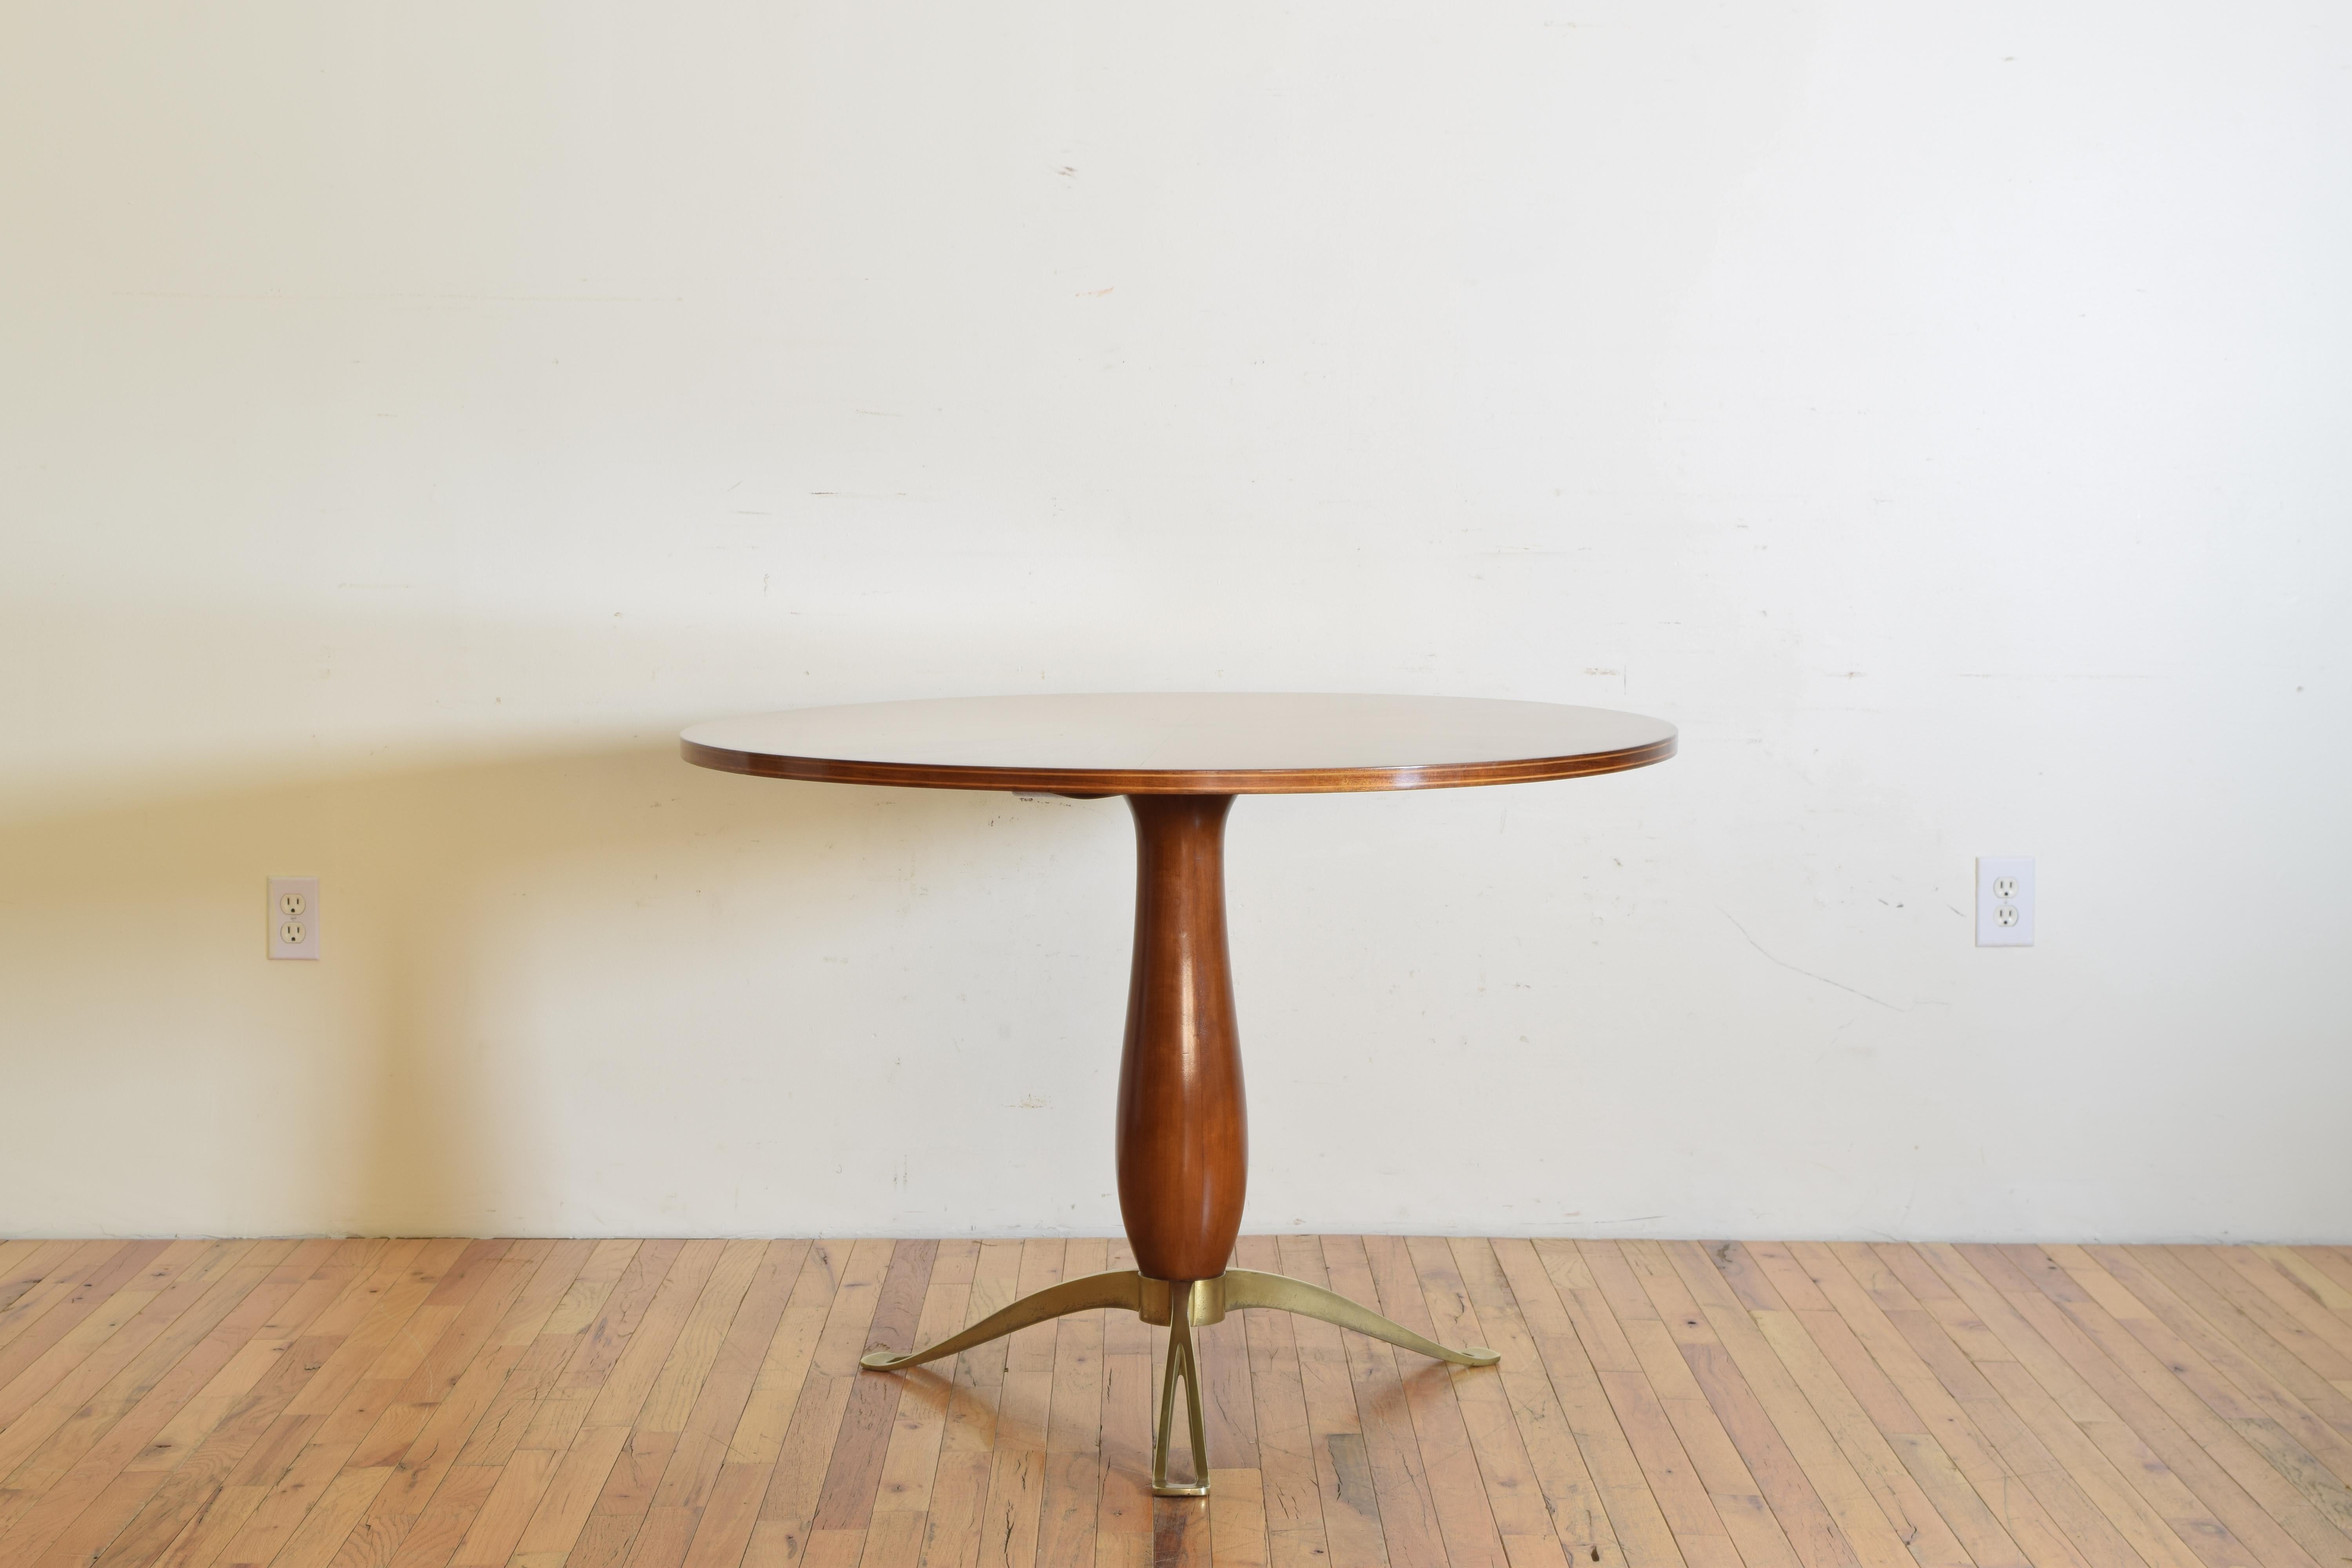 The circular walnut top with matched veneers and an inlaid band in profile above a solid walnut standard raised on shaped brass legs.